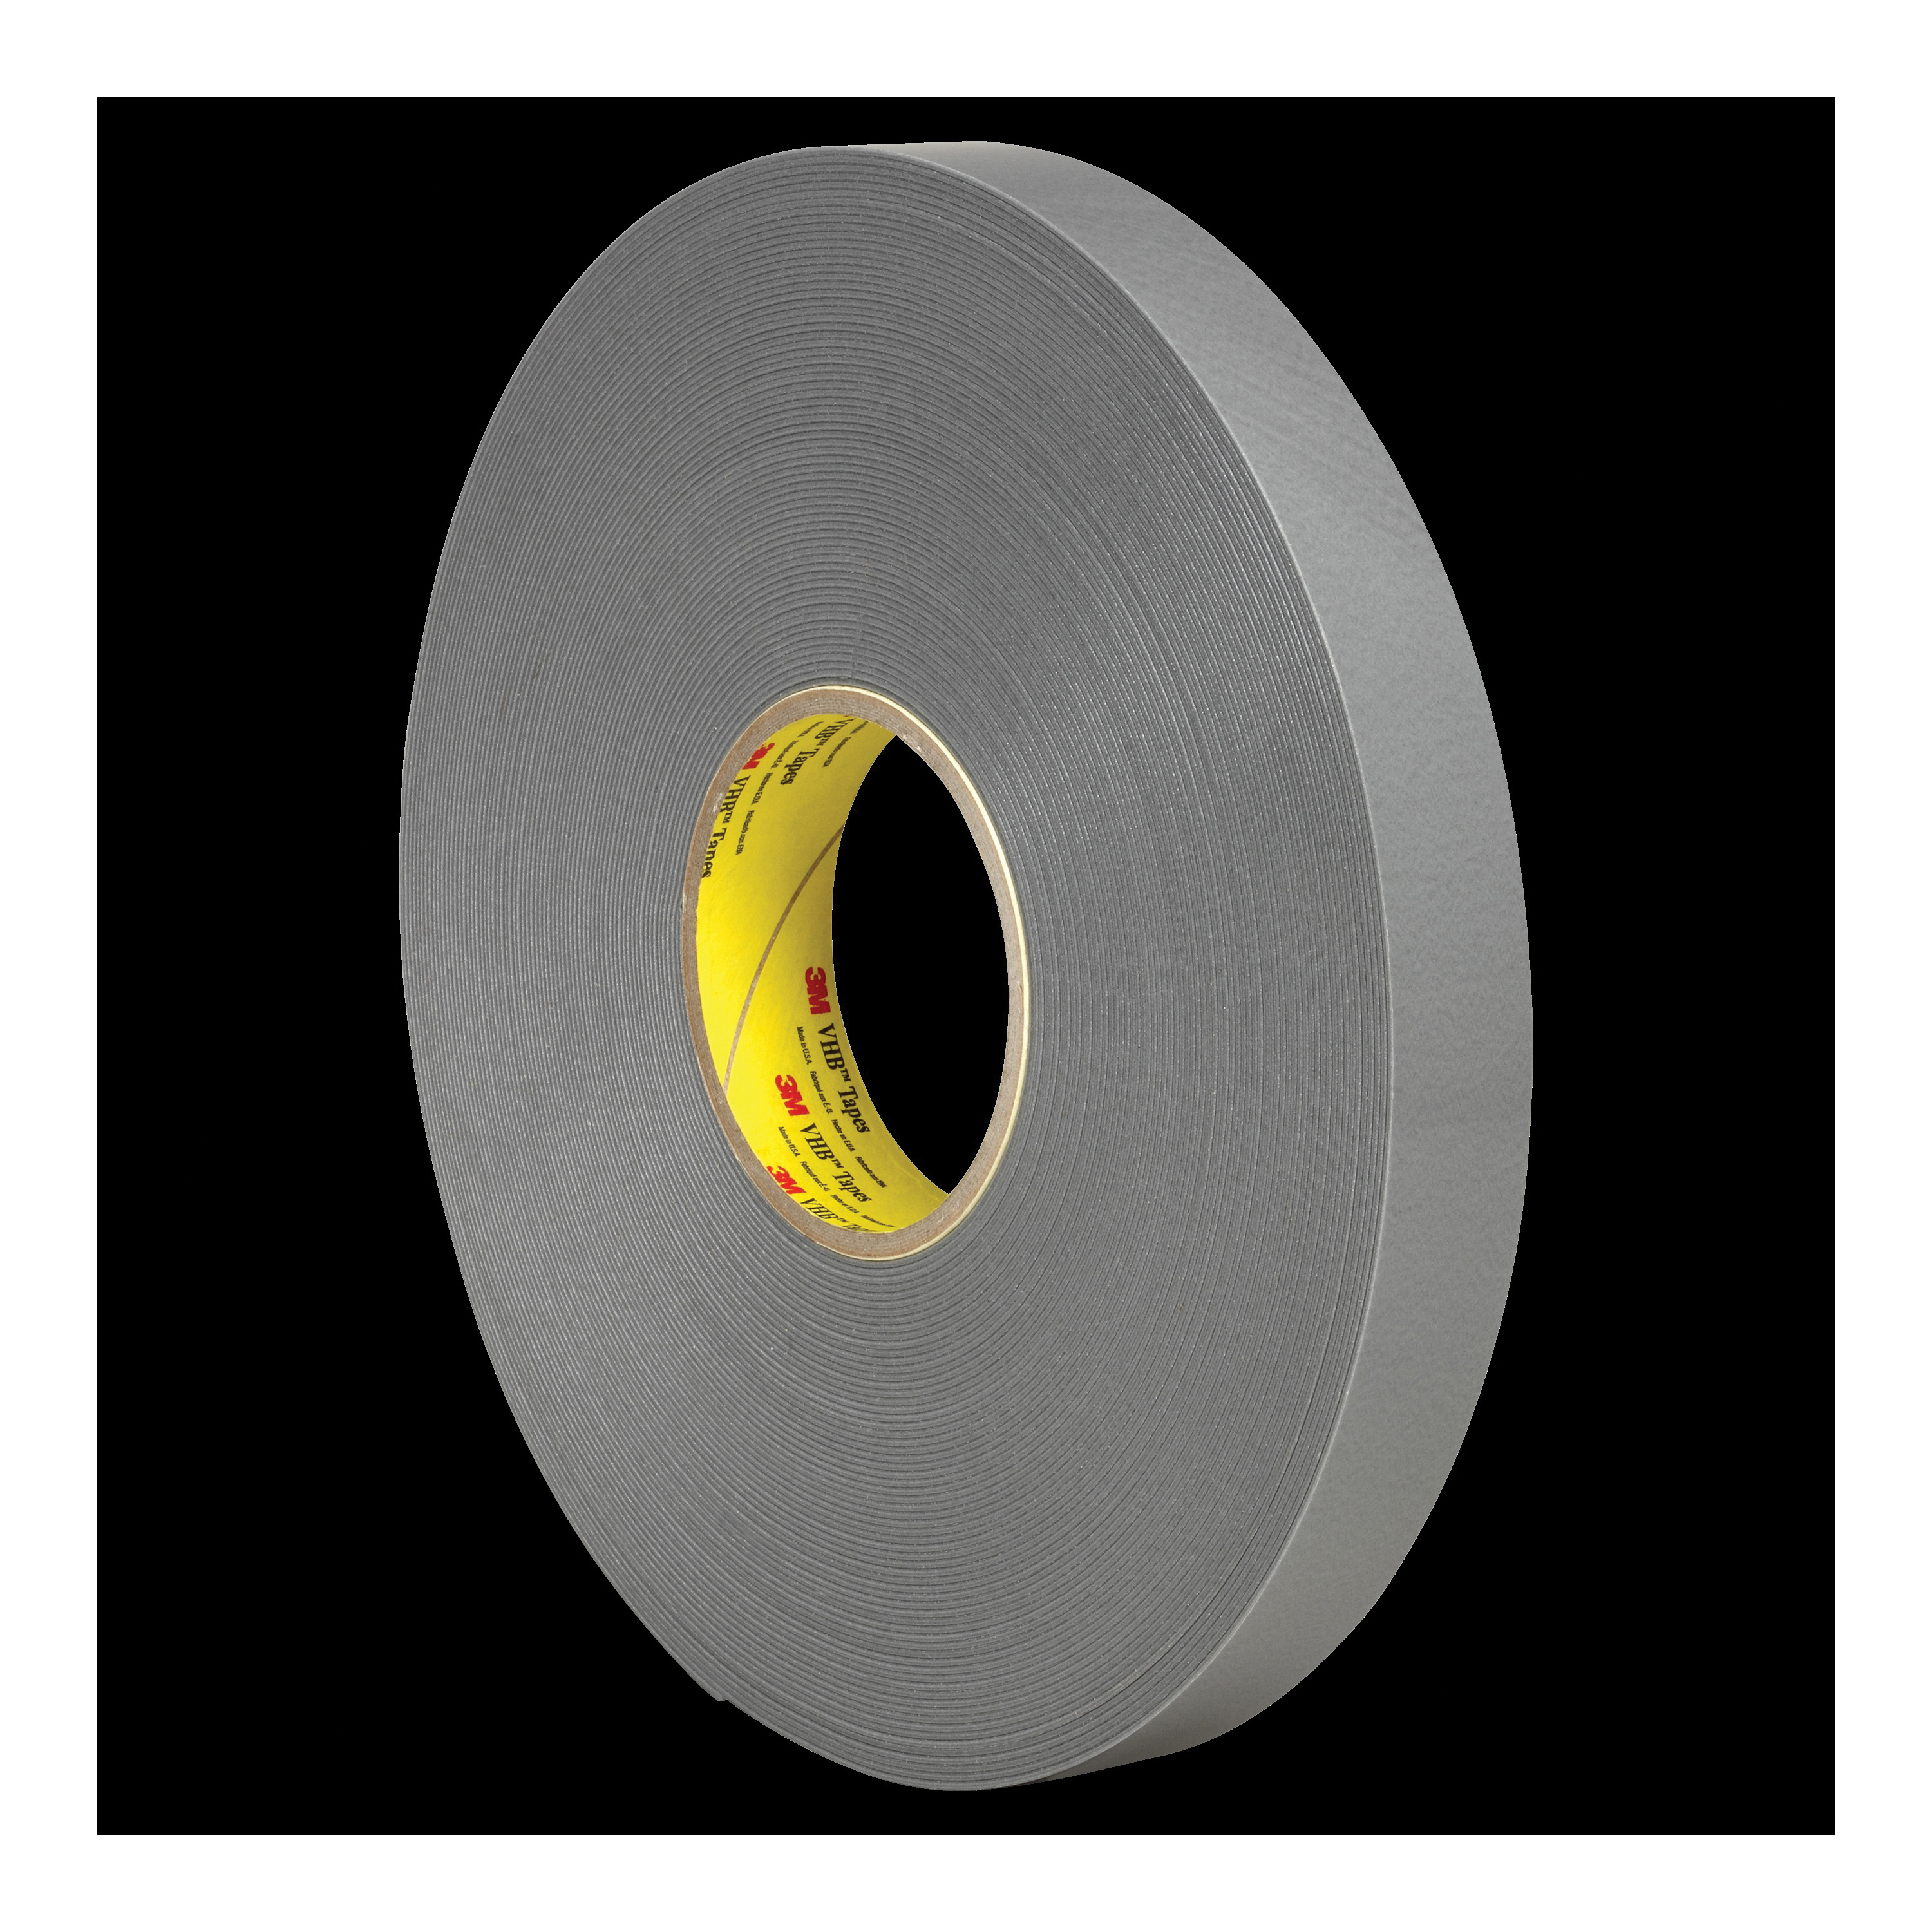 3M™ VHB™ 021200-30564 Pressure Sensitive Double Sided Bonding Tape, 36 yd L x 1/2 in W, 0.045 in THK, Low Temperature Acrylic Adhesive, Acrylic Foam Backing, Gray